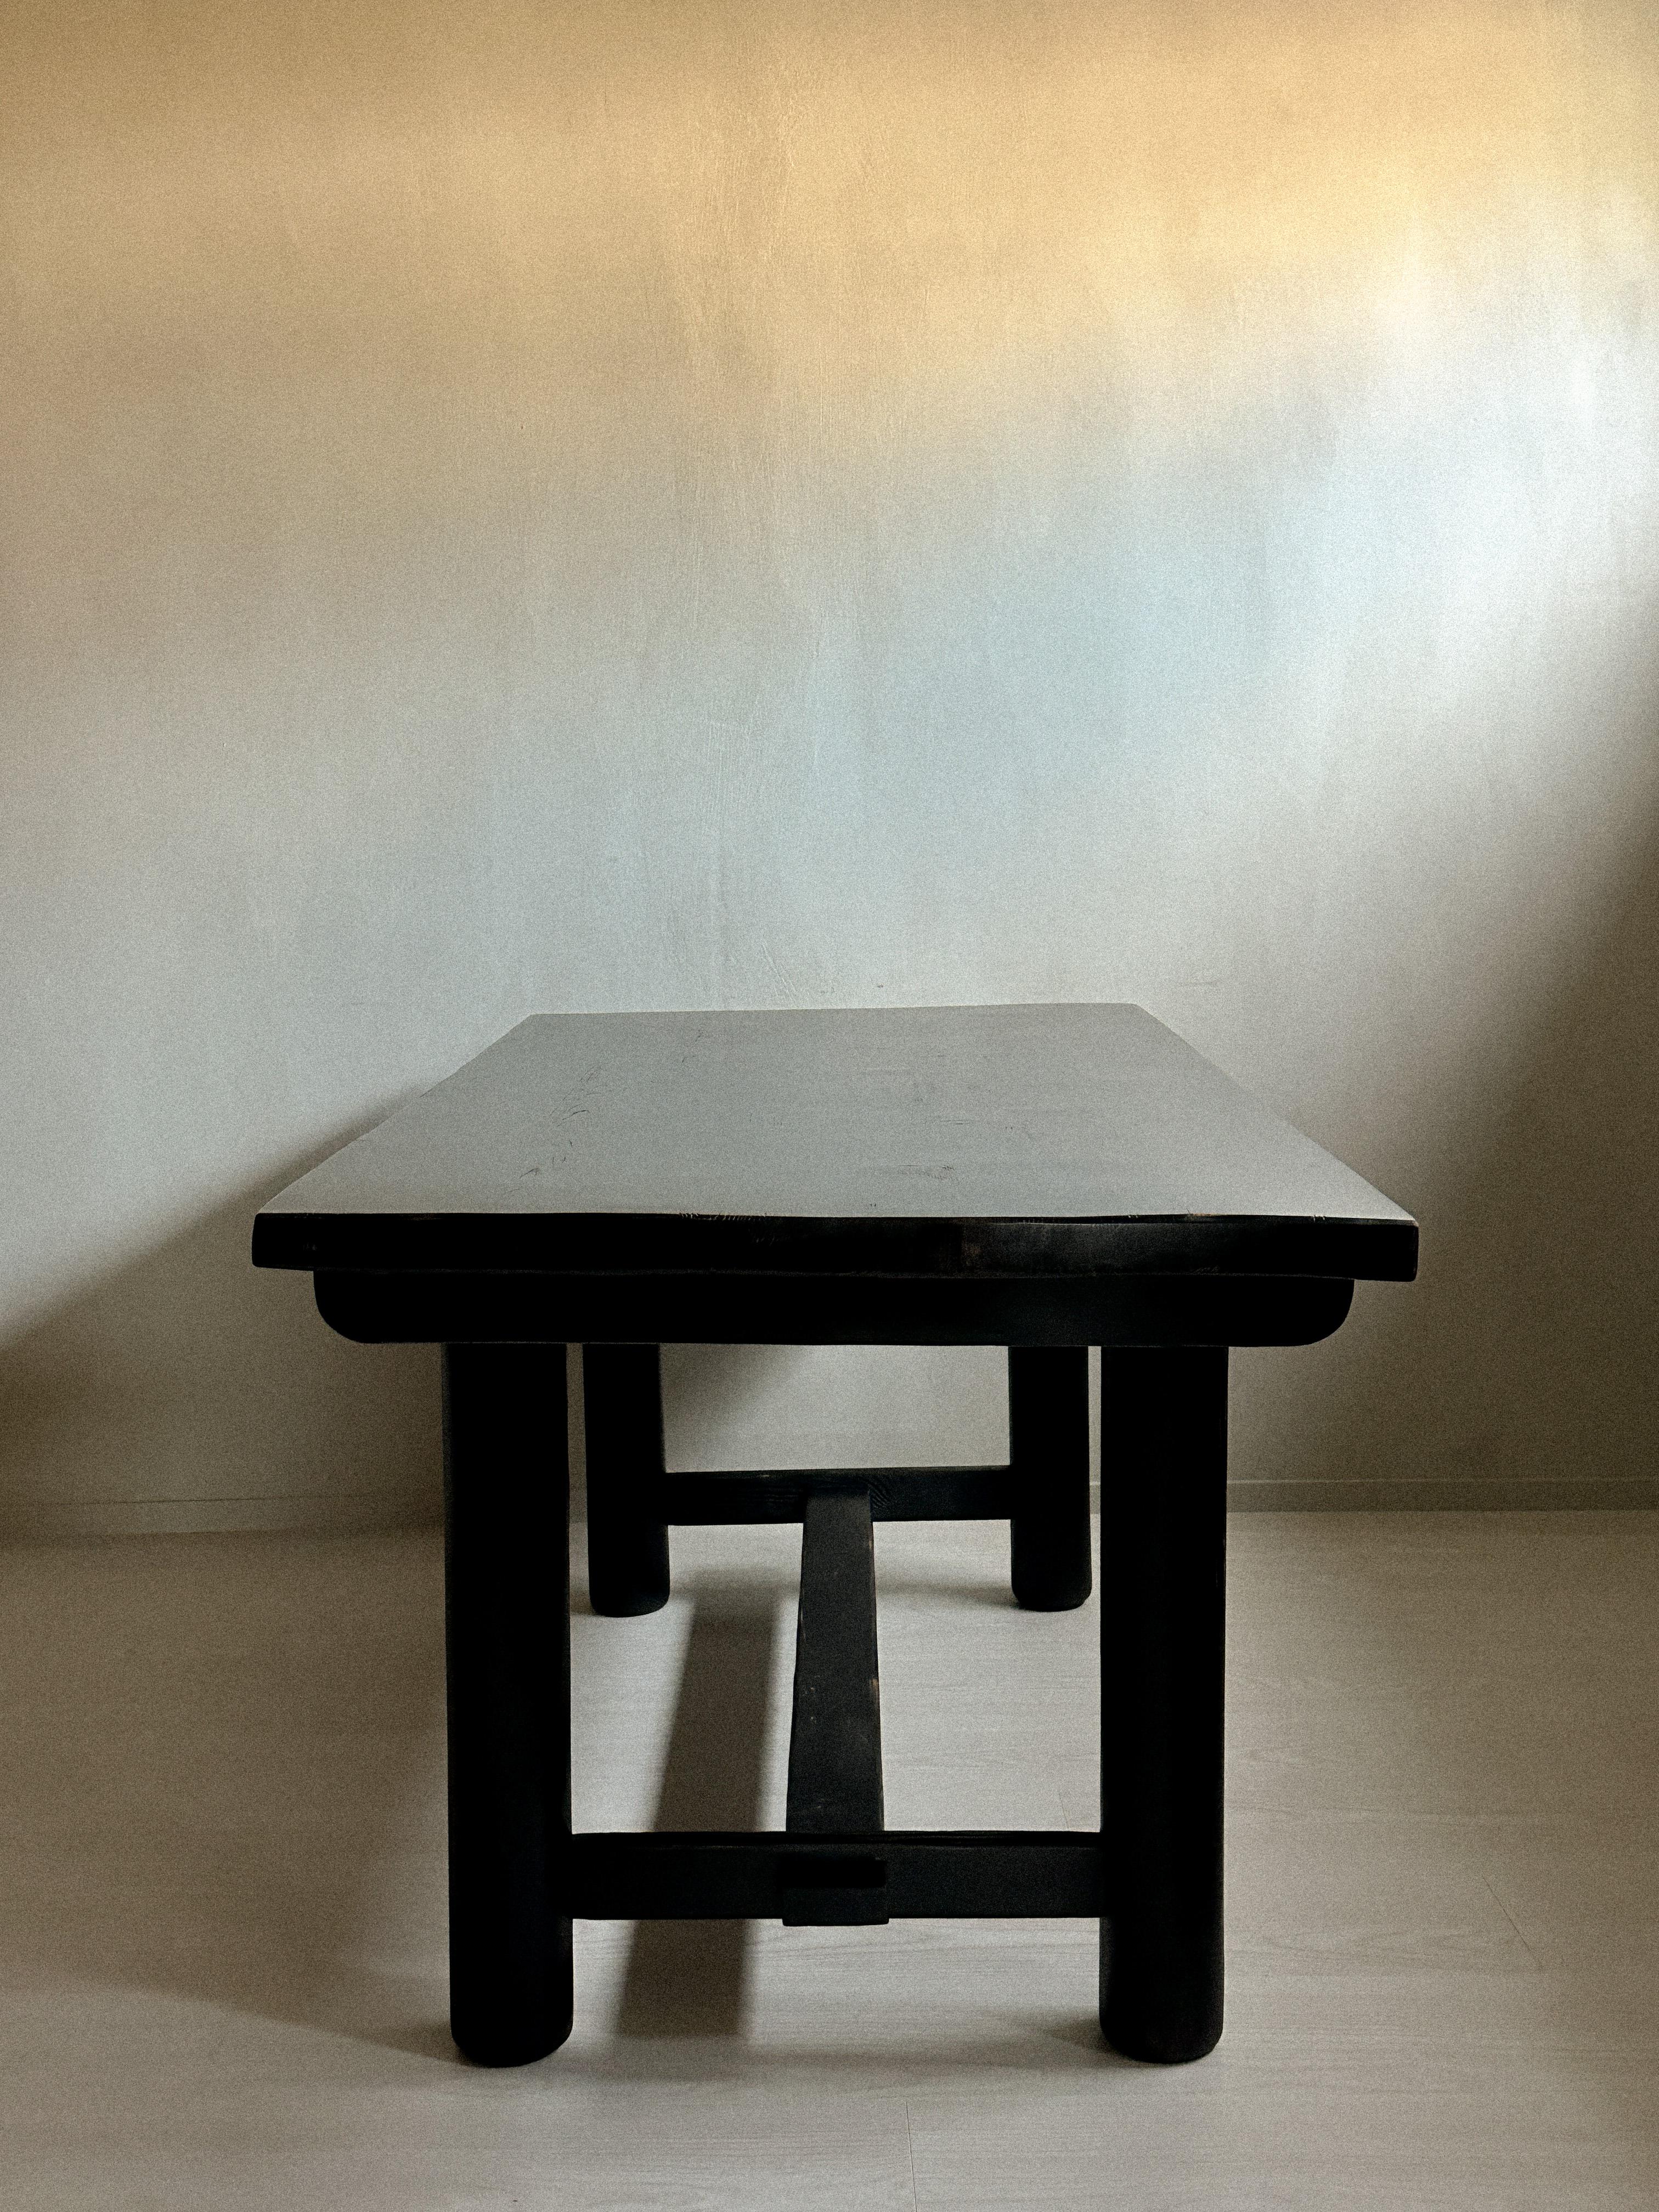 Mid-Century Modern An Ebonized Meribel Dining Table, Wood, Charlotte Perriand (attr.), France 1959 For Sale